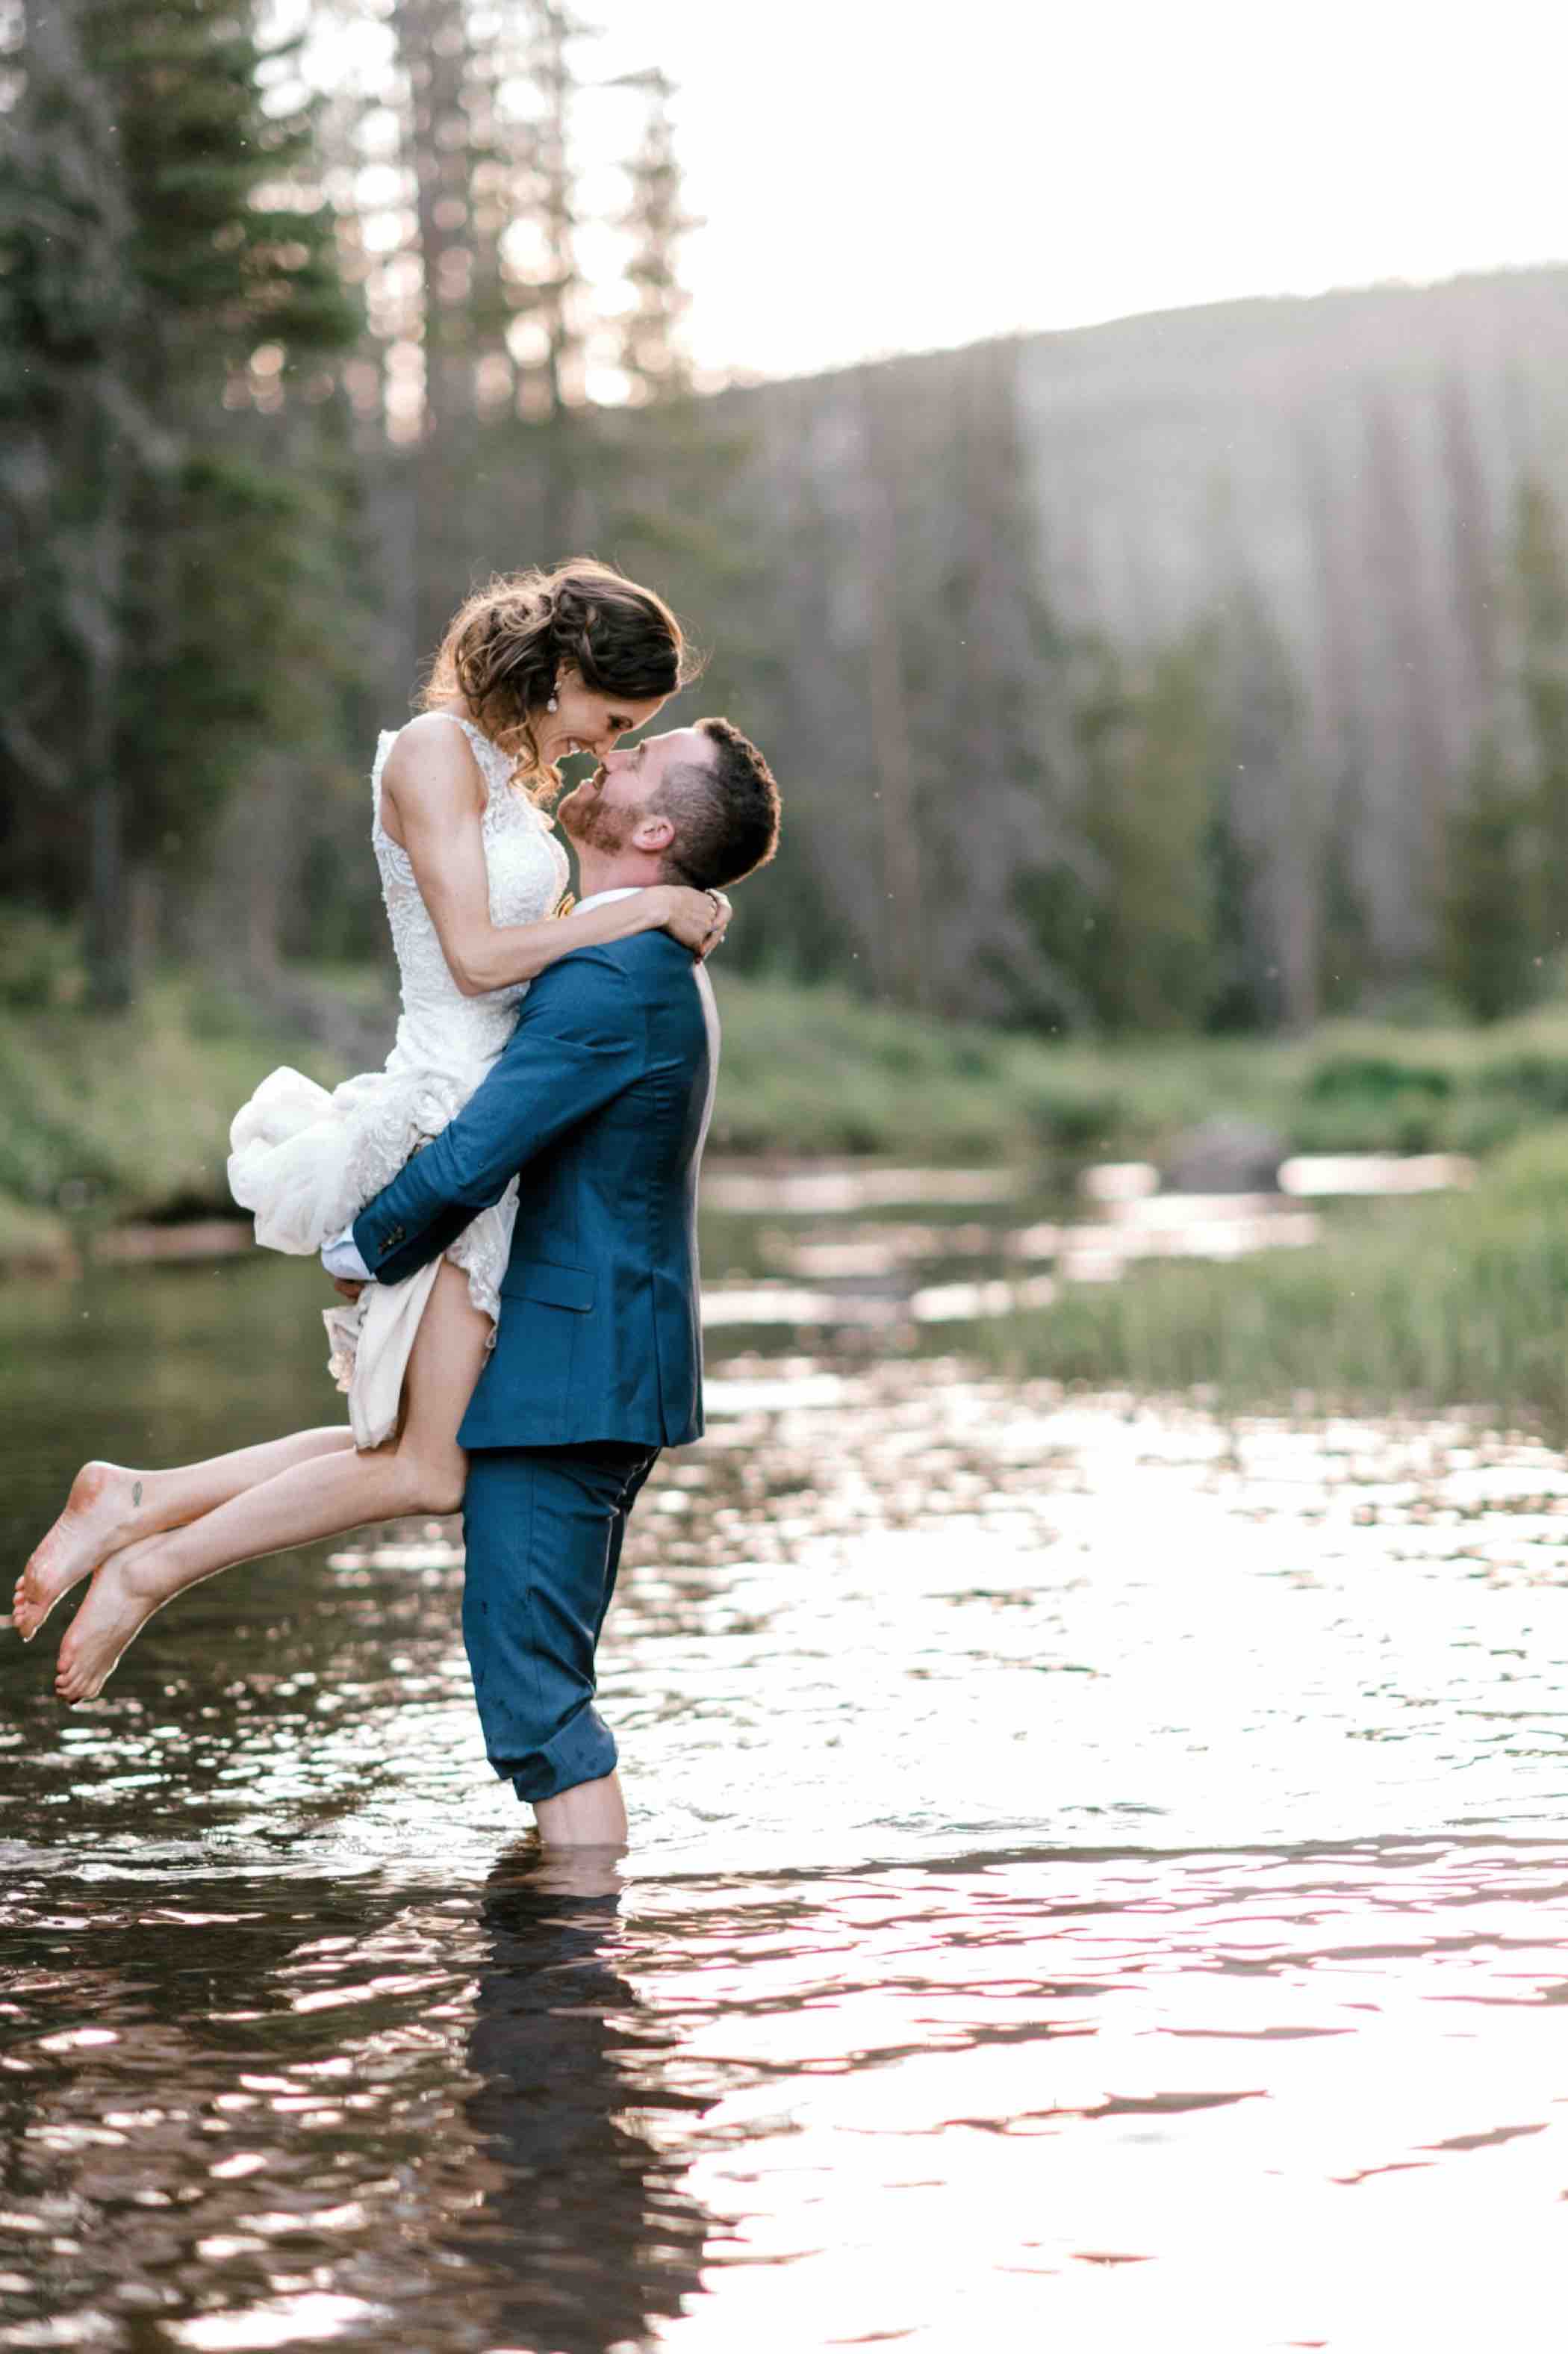 Kris and Sallie chose to take their bride and groom portraits in the water of Piney Lake at Piney River Ranch in Vail, Colorado. Photo by Ali and Garrett, Romantic, Adventurous, Nostalgic Wedding Photographers.